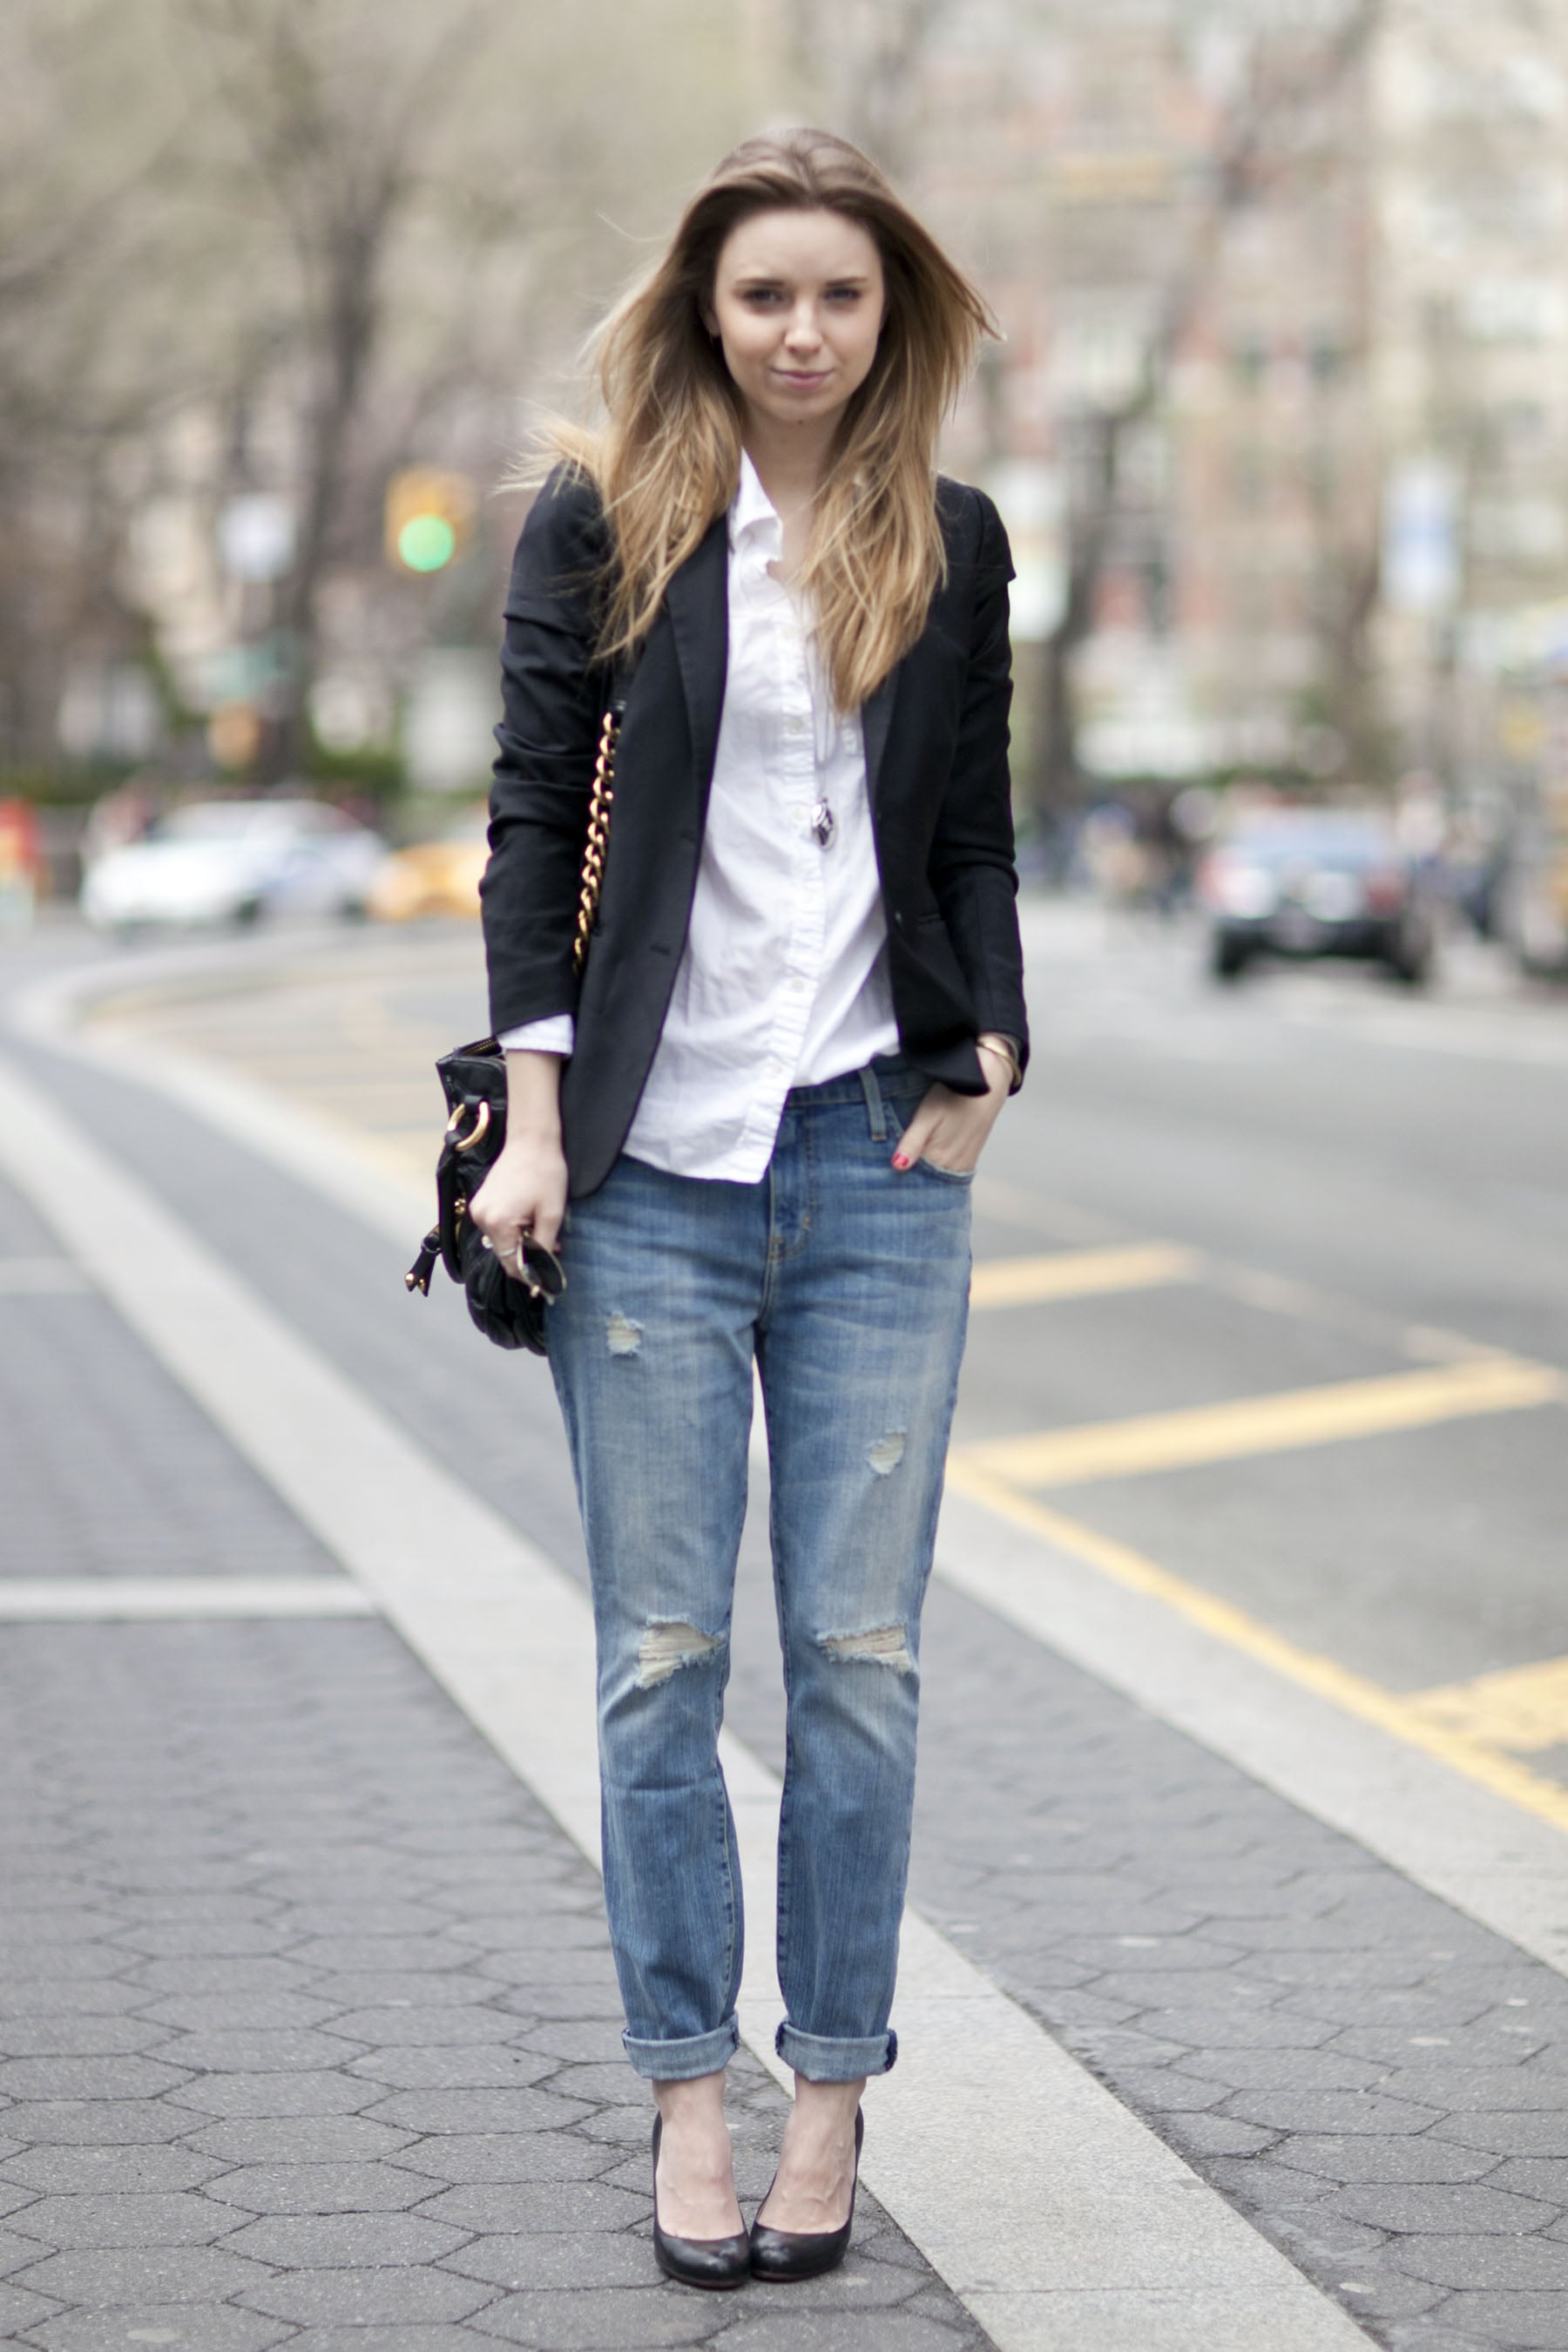 Take your favorite button-down and jeans to work with a blazer and | Oh ...